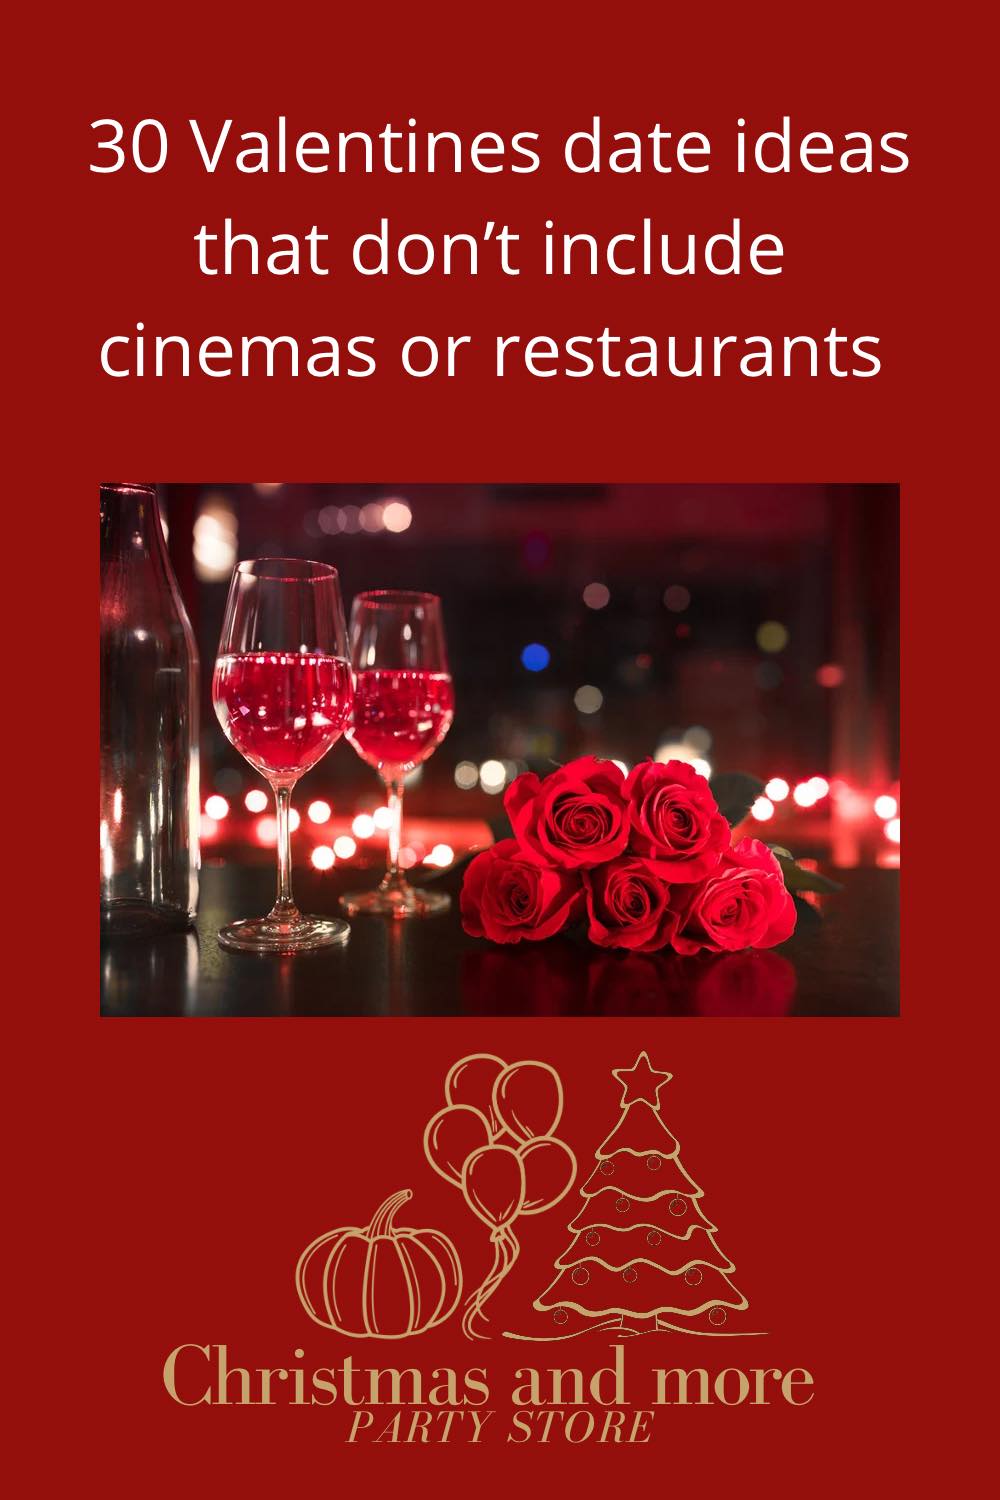 30 Valentine's date ideas that don't include a restaurant or cinema!